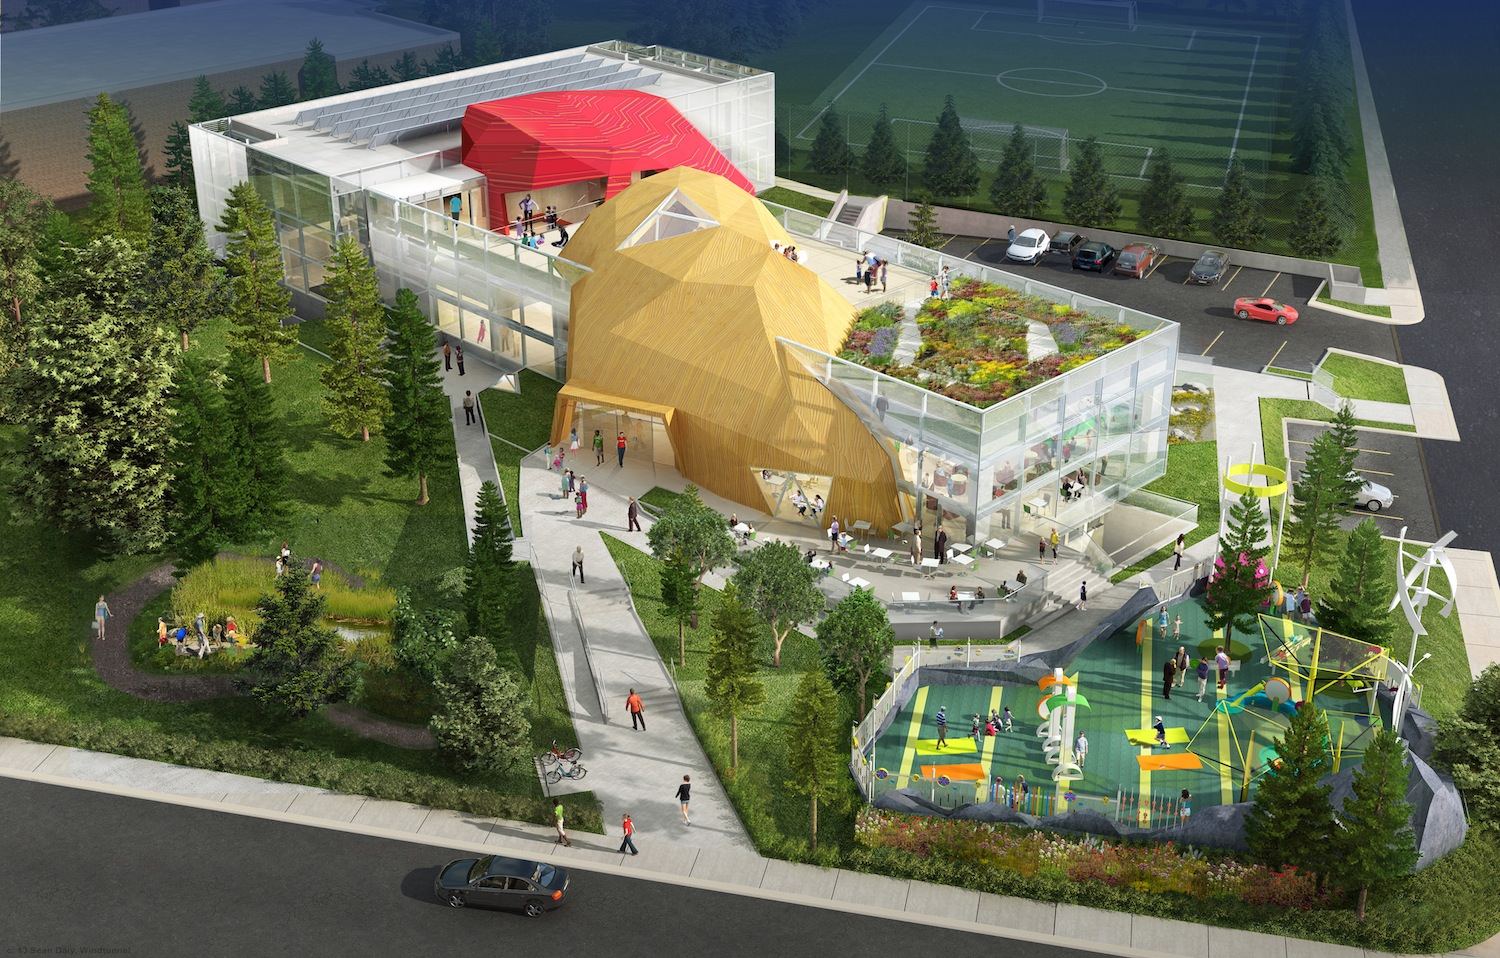 Embodying the theme little mountains, the 35,000-sf museum will be located in 